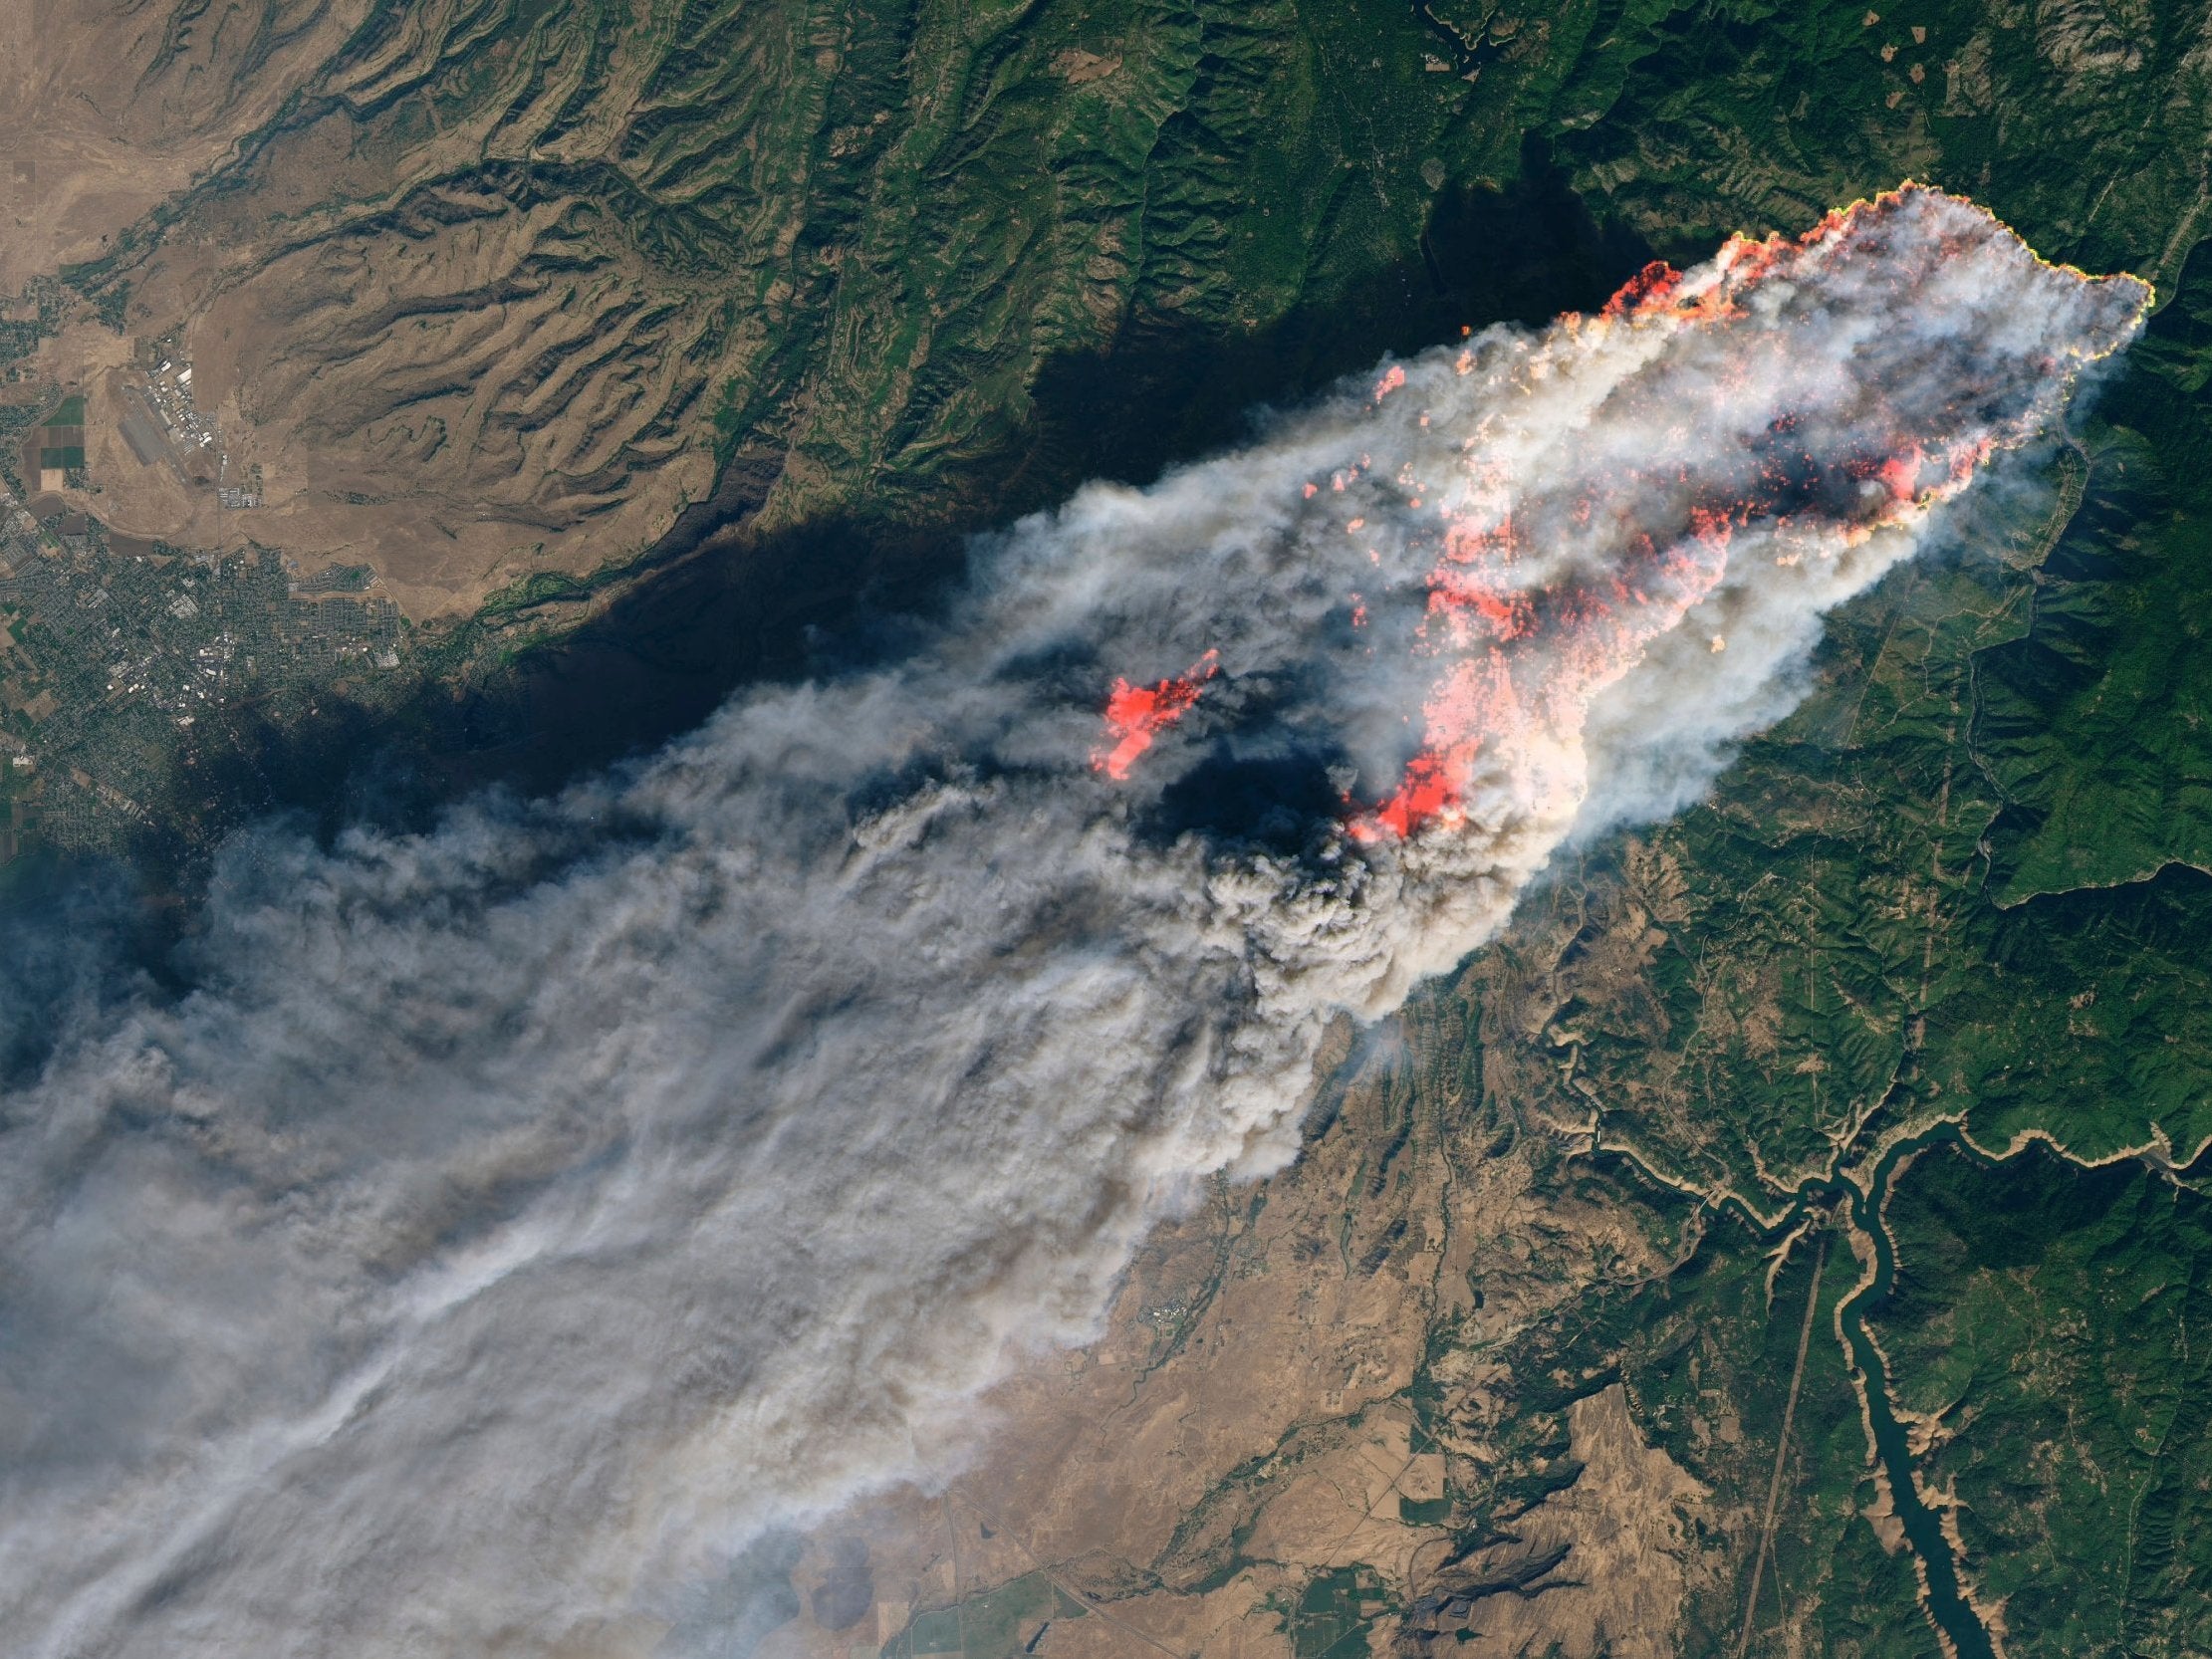 Enhanced satellite image provided by Nasa's Earth Observatory shows the Camp Fire in Paradise, California, on Thursday, 8 November